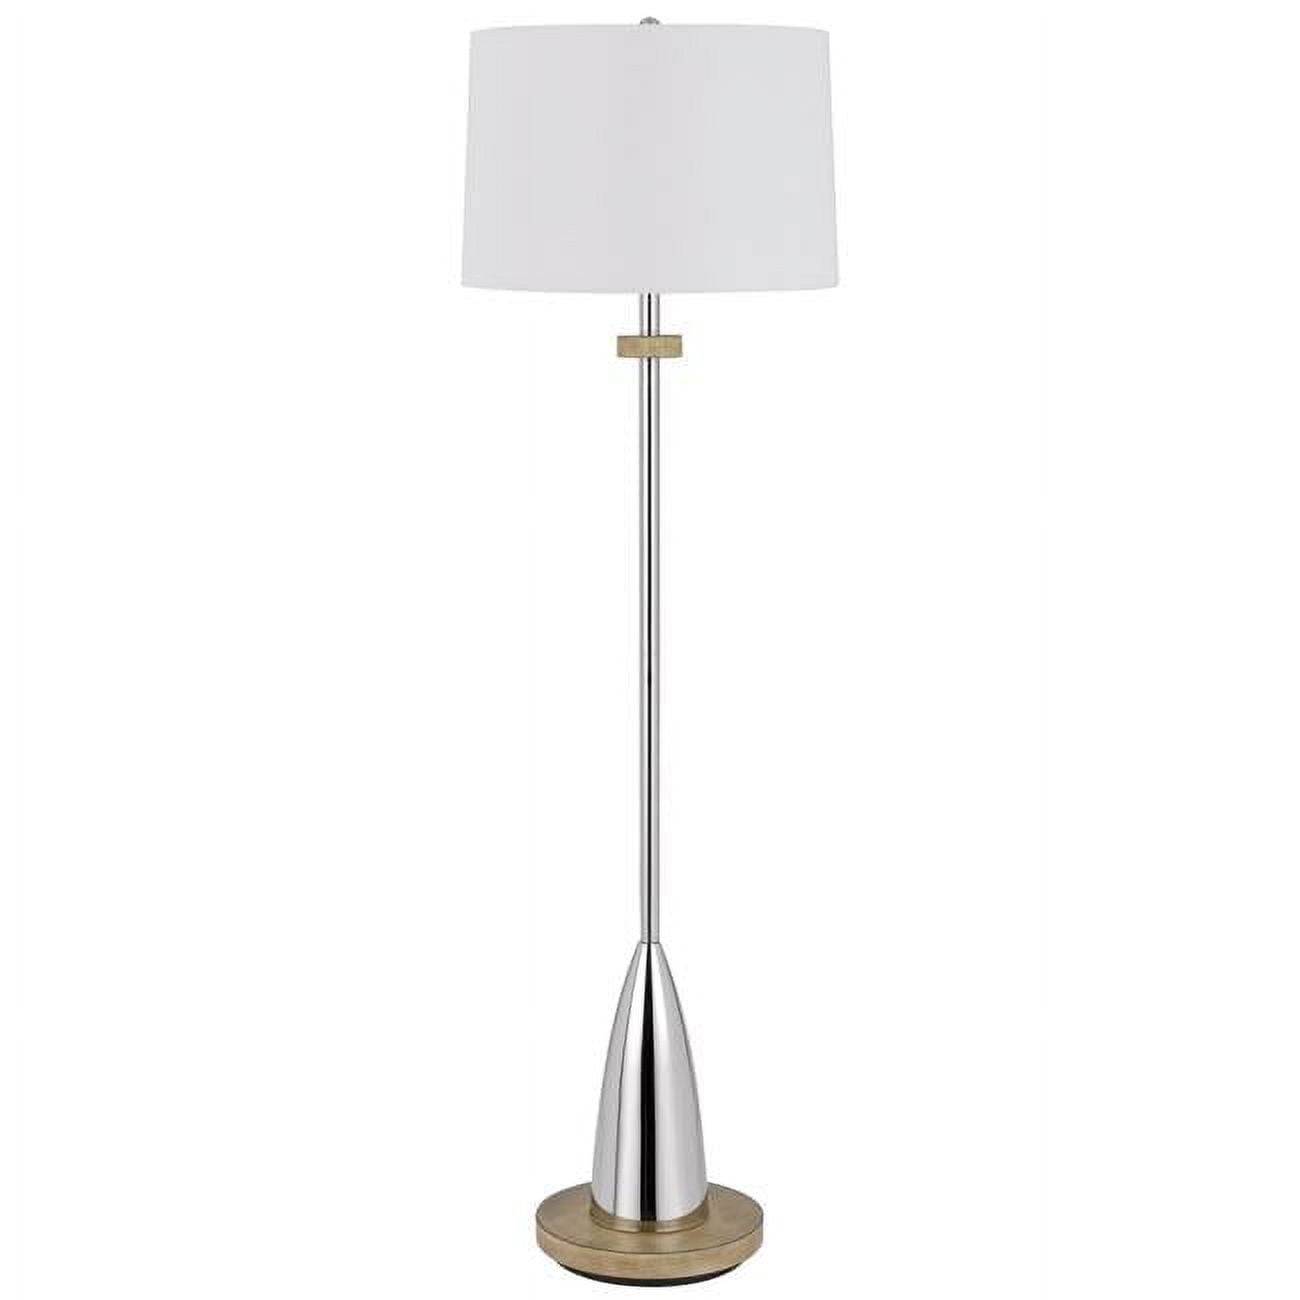 Picture of Cal Lighting BO-3054FL 150W 3 Way Lockport Metal Floor Lamp with Rubber Wood Base